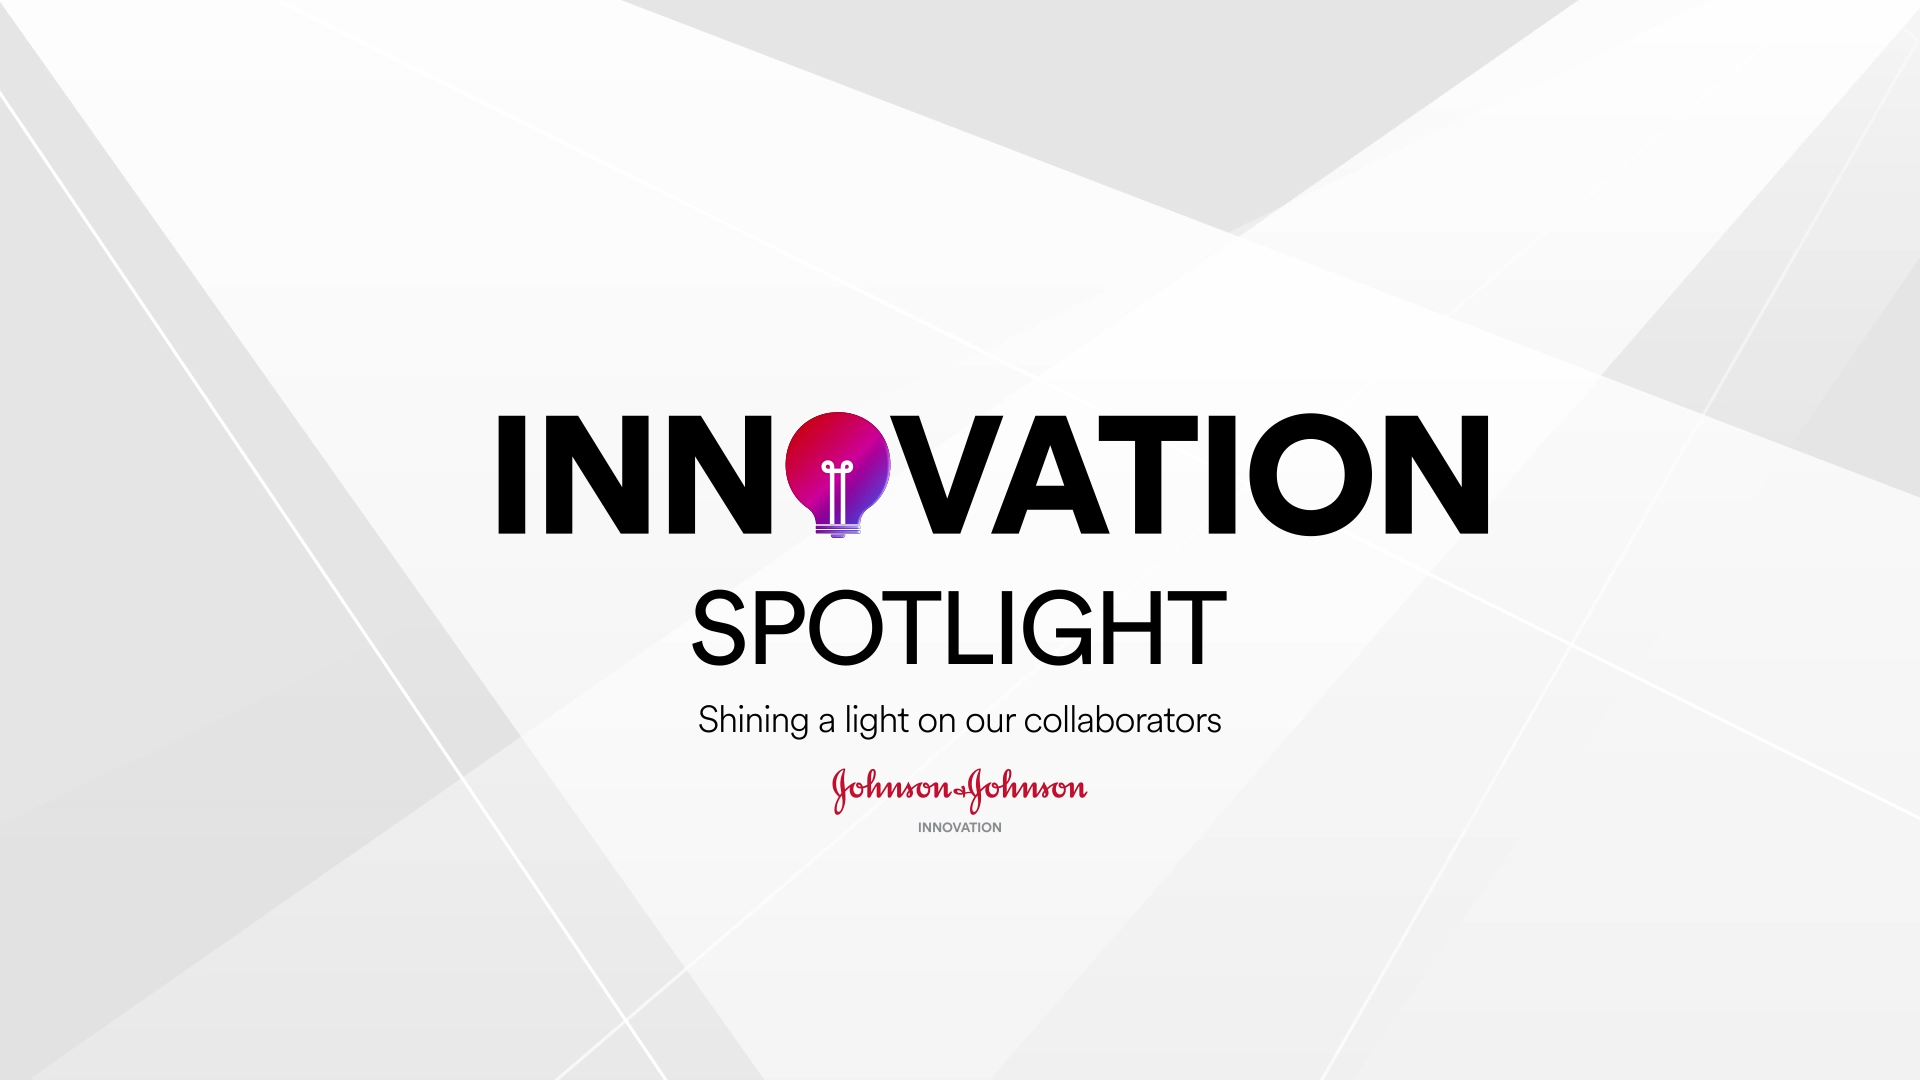 Innovation and Partnership Shines a Bright Light in Dark Times